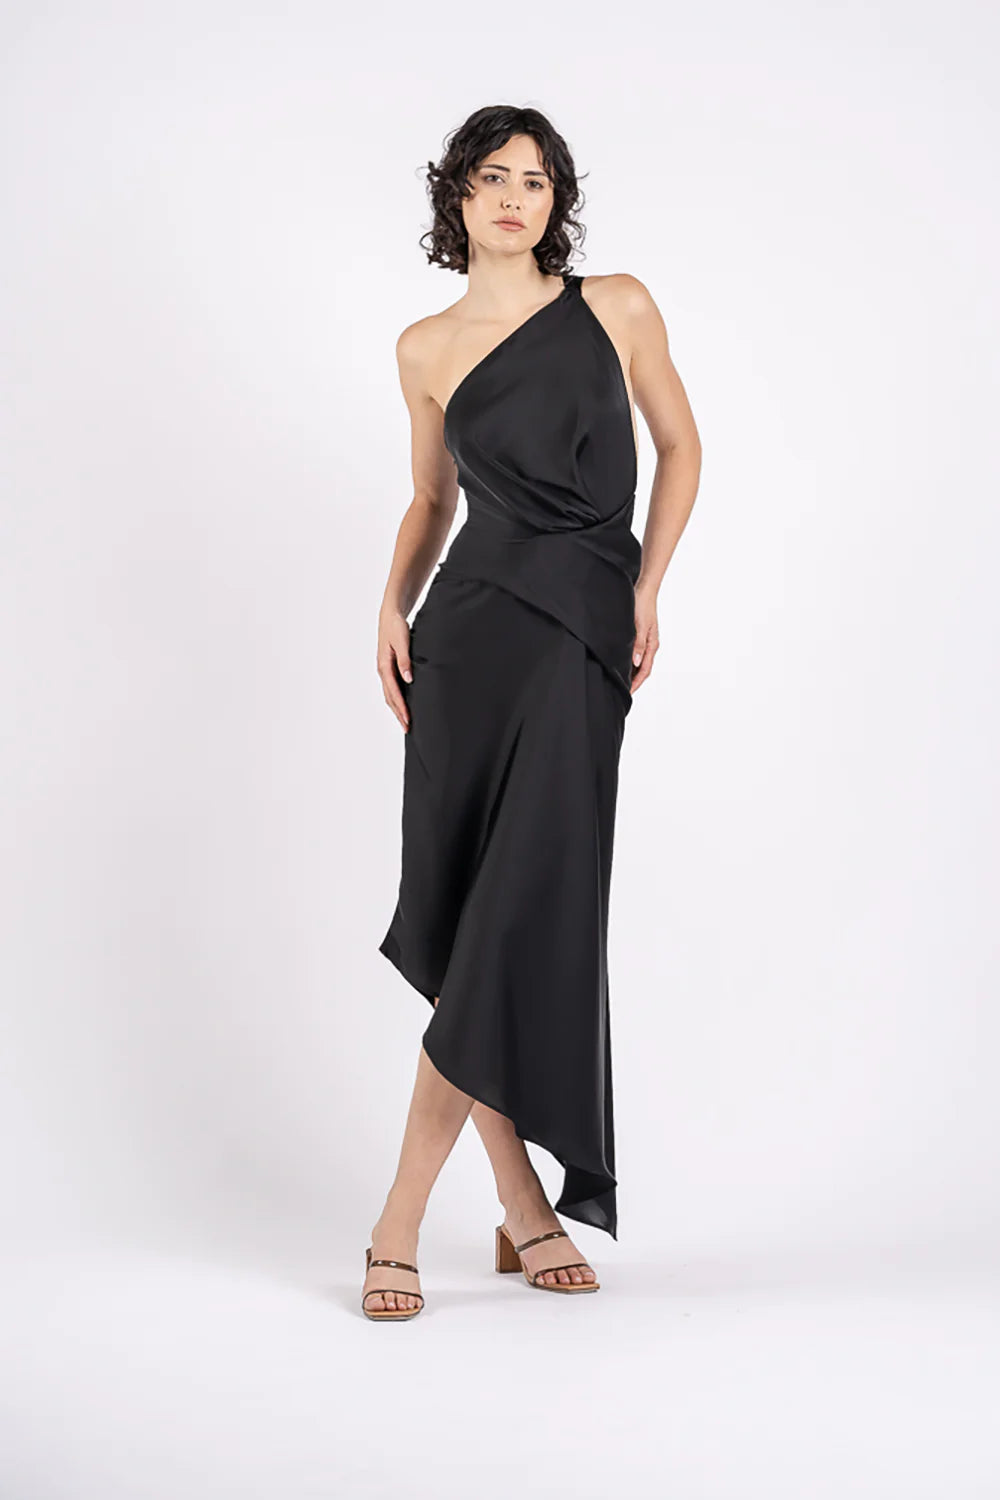 One Fell Swoop Temptation Dress, Black Air – Gladstone Bridal Boutique